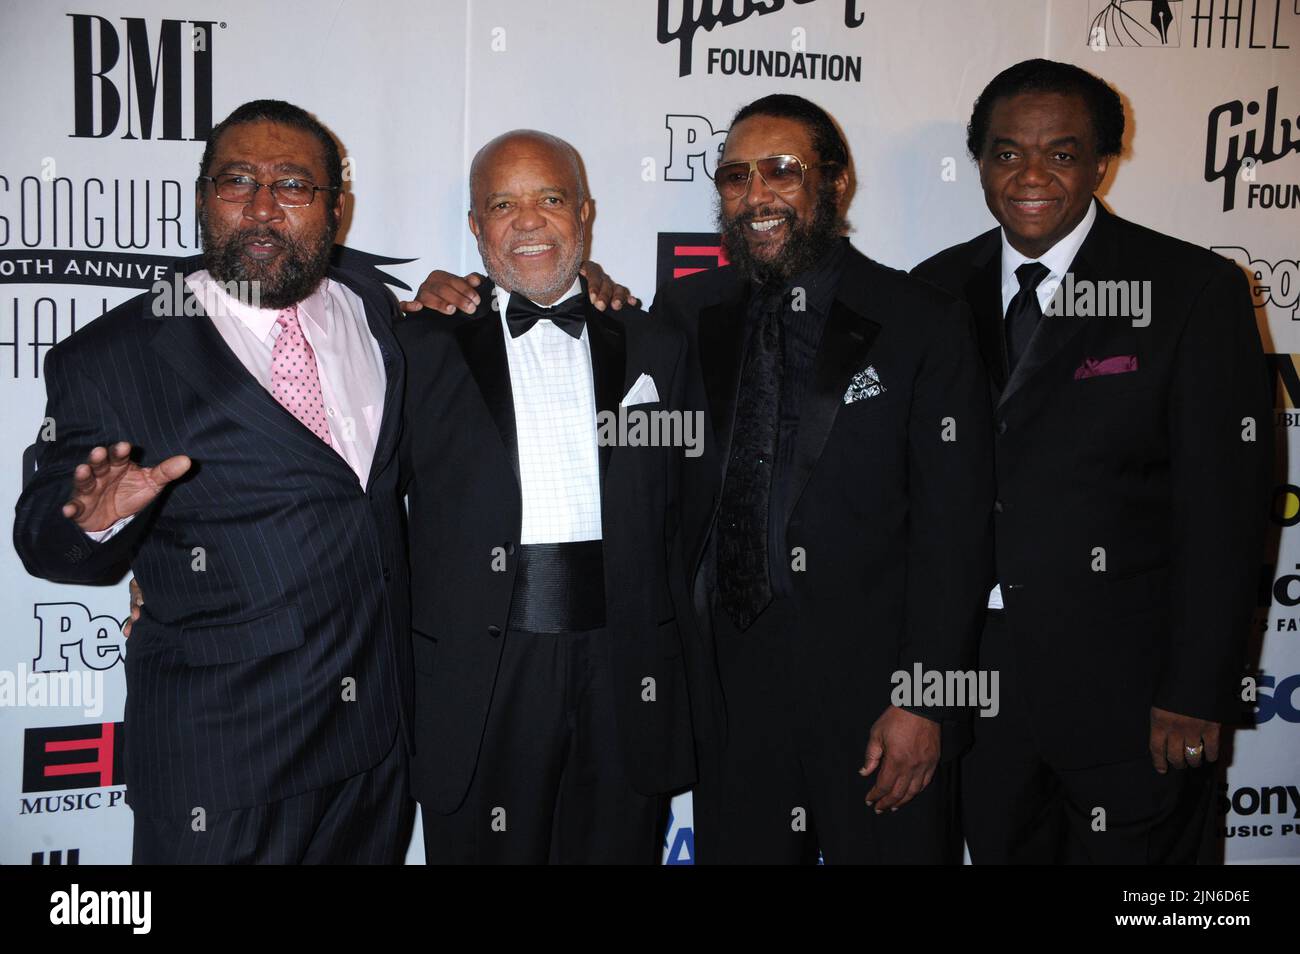 **FILE PHOTO** Lamont Dozier Has Passed Away at 81. Brian Holland, Berry Gordy, Eddie Holland Jr. and Lamont Dozier at the 40th Annual Songwriters Hall of Fame Ceremony at The Marriott Marquis in New York City. June 18, 2009. Credit: Dennis Van Tine/MediaPunch Stock Photo